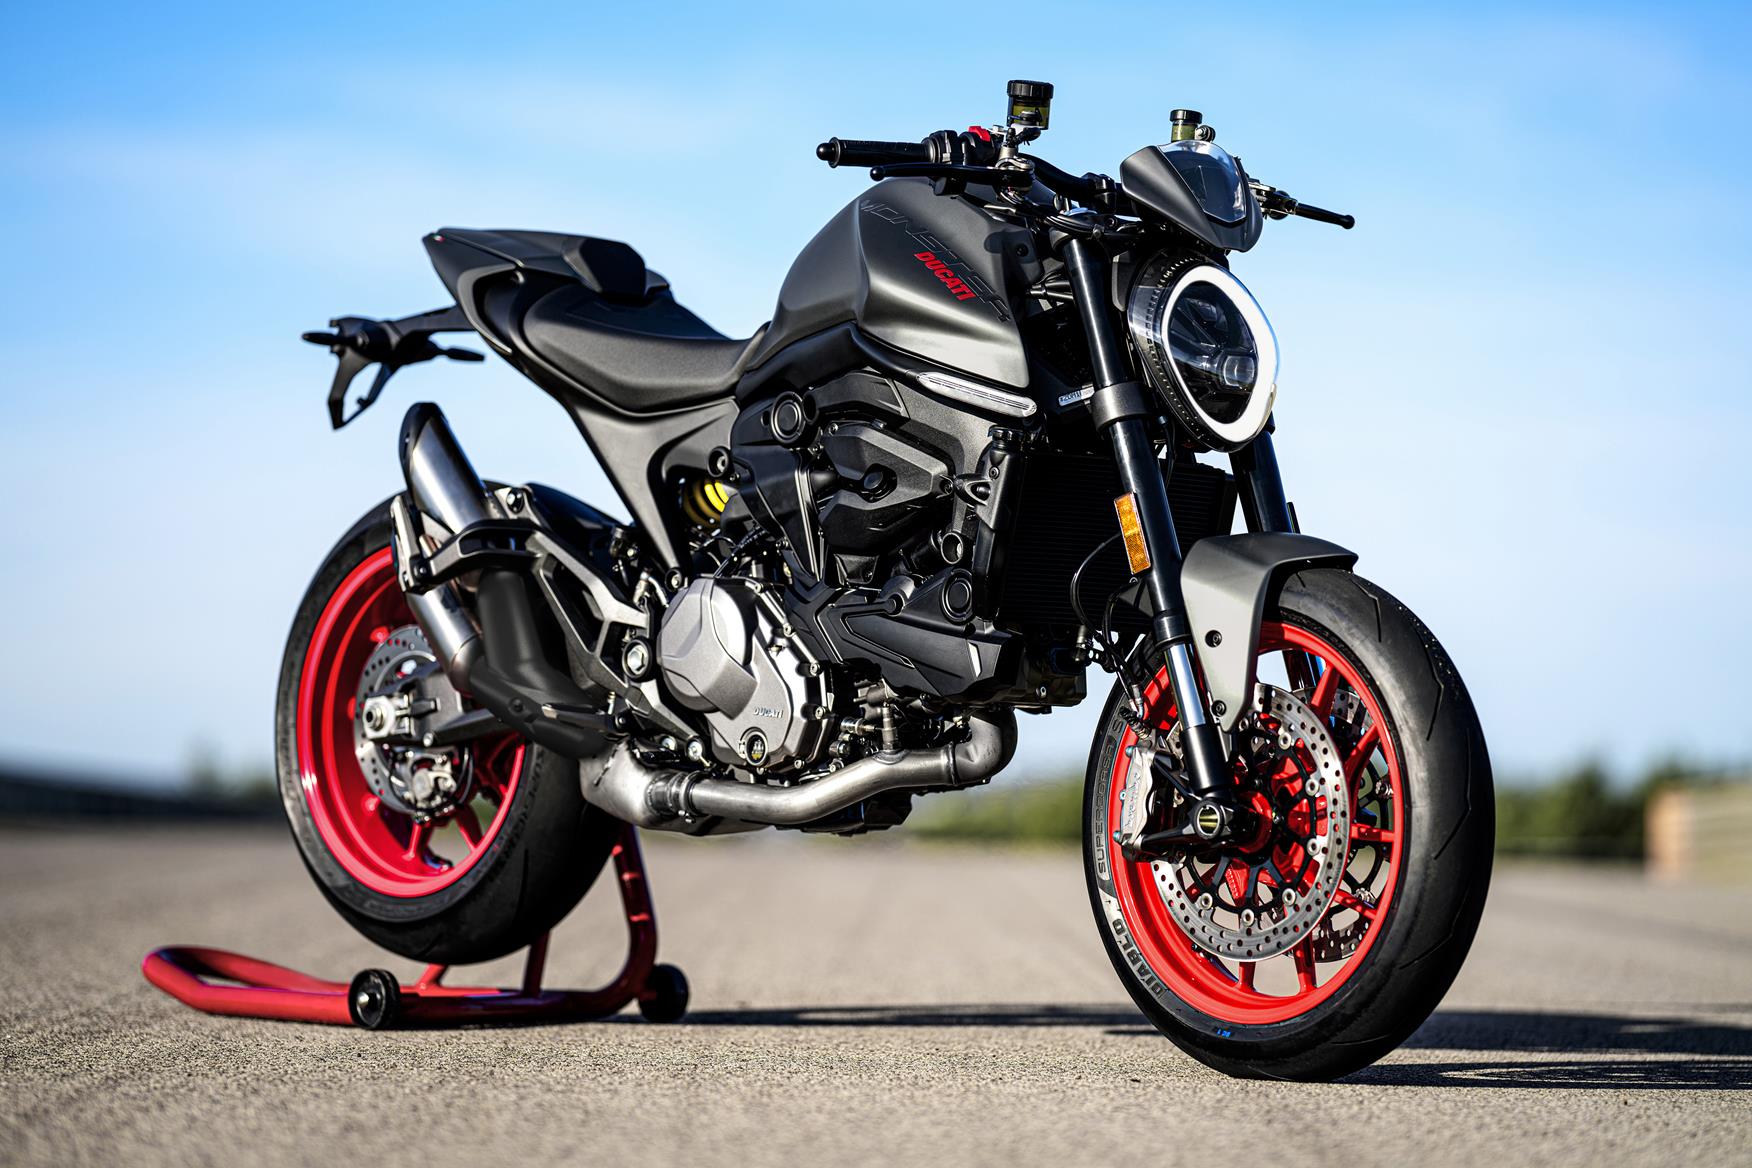 Ducati shed weight and ditch trellis frame for 2021 Monster